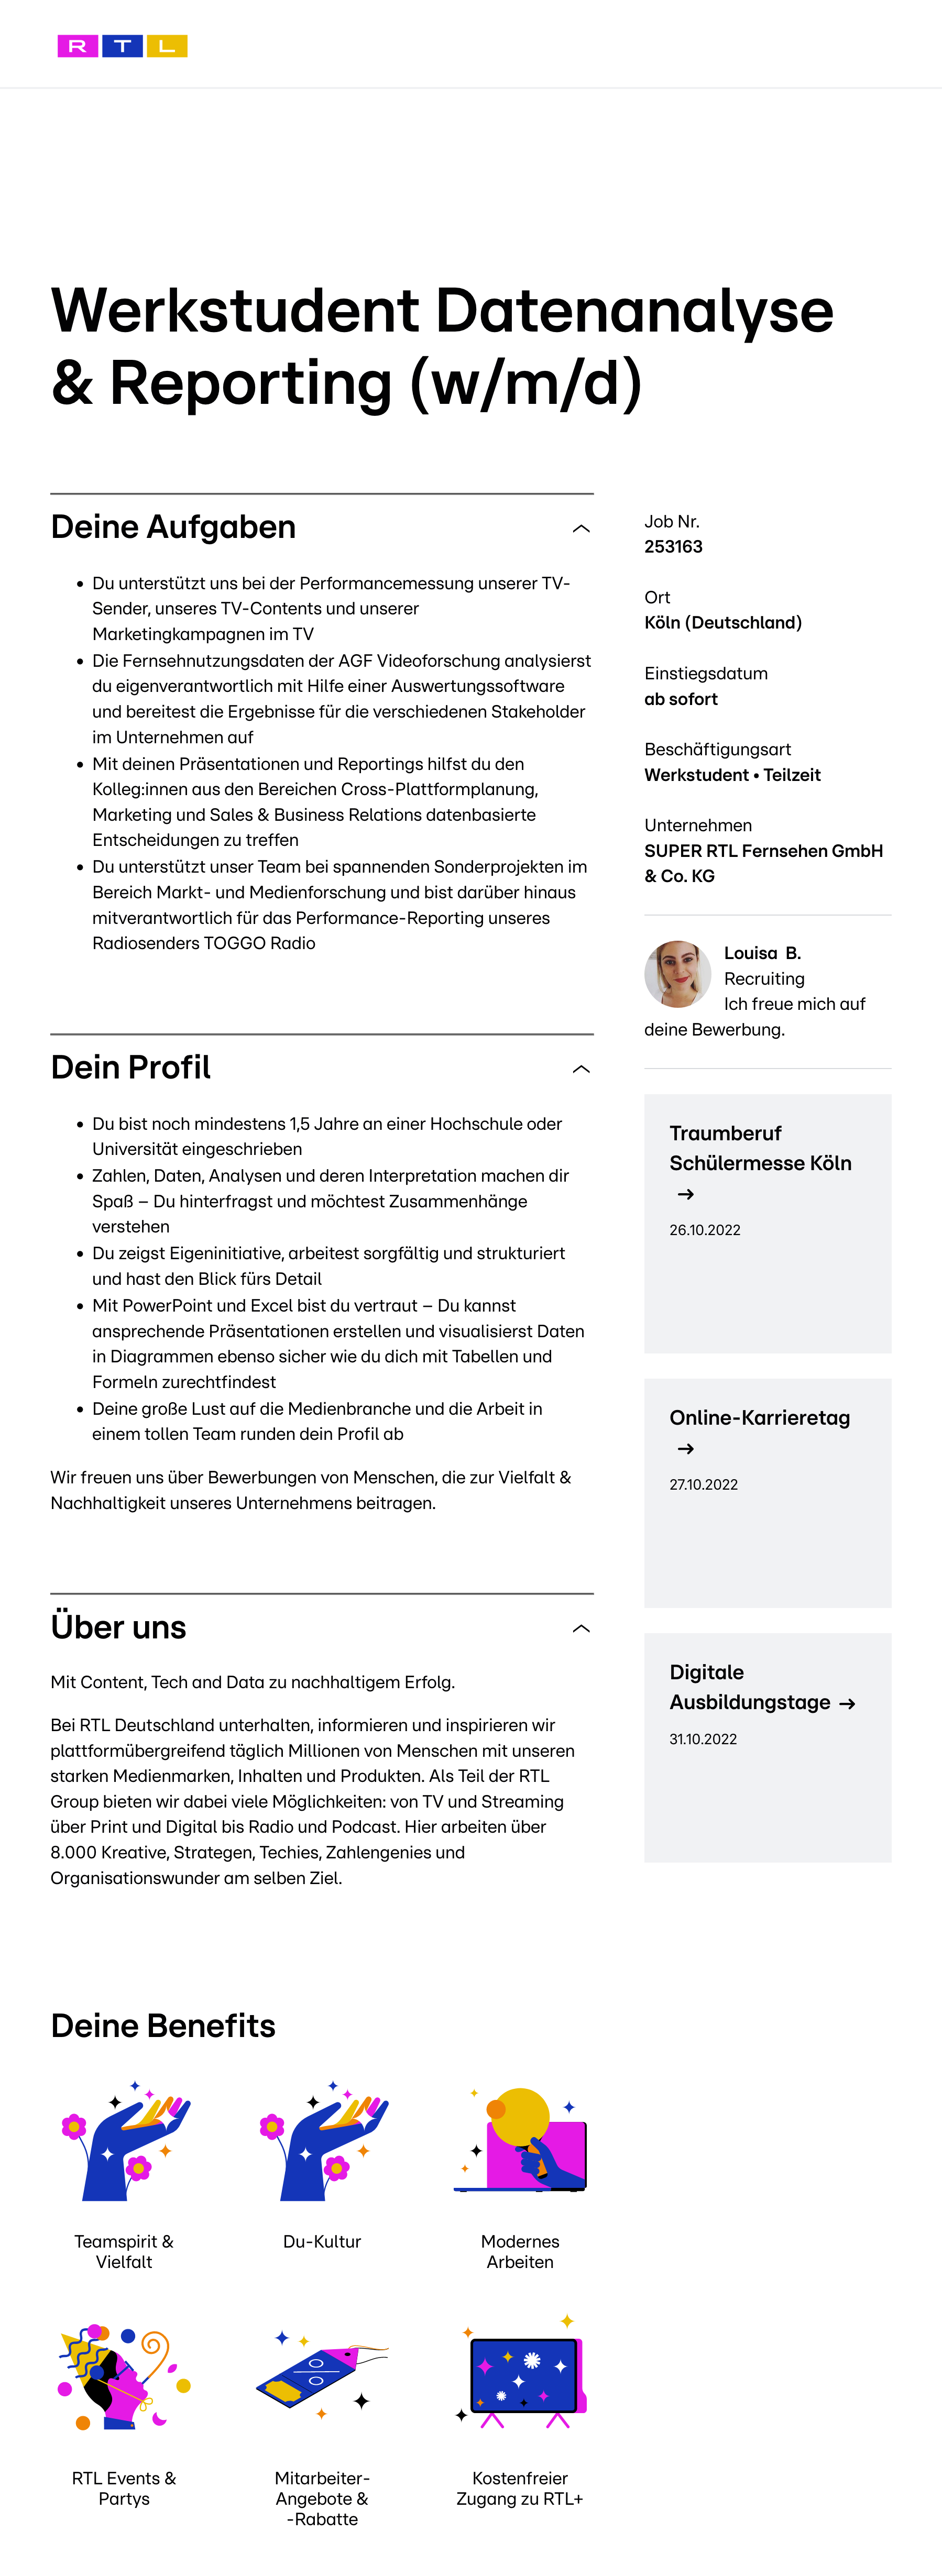 Werkstudent Datenanalyse & Reporting (w/m/d)